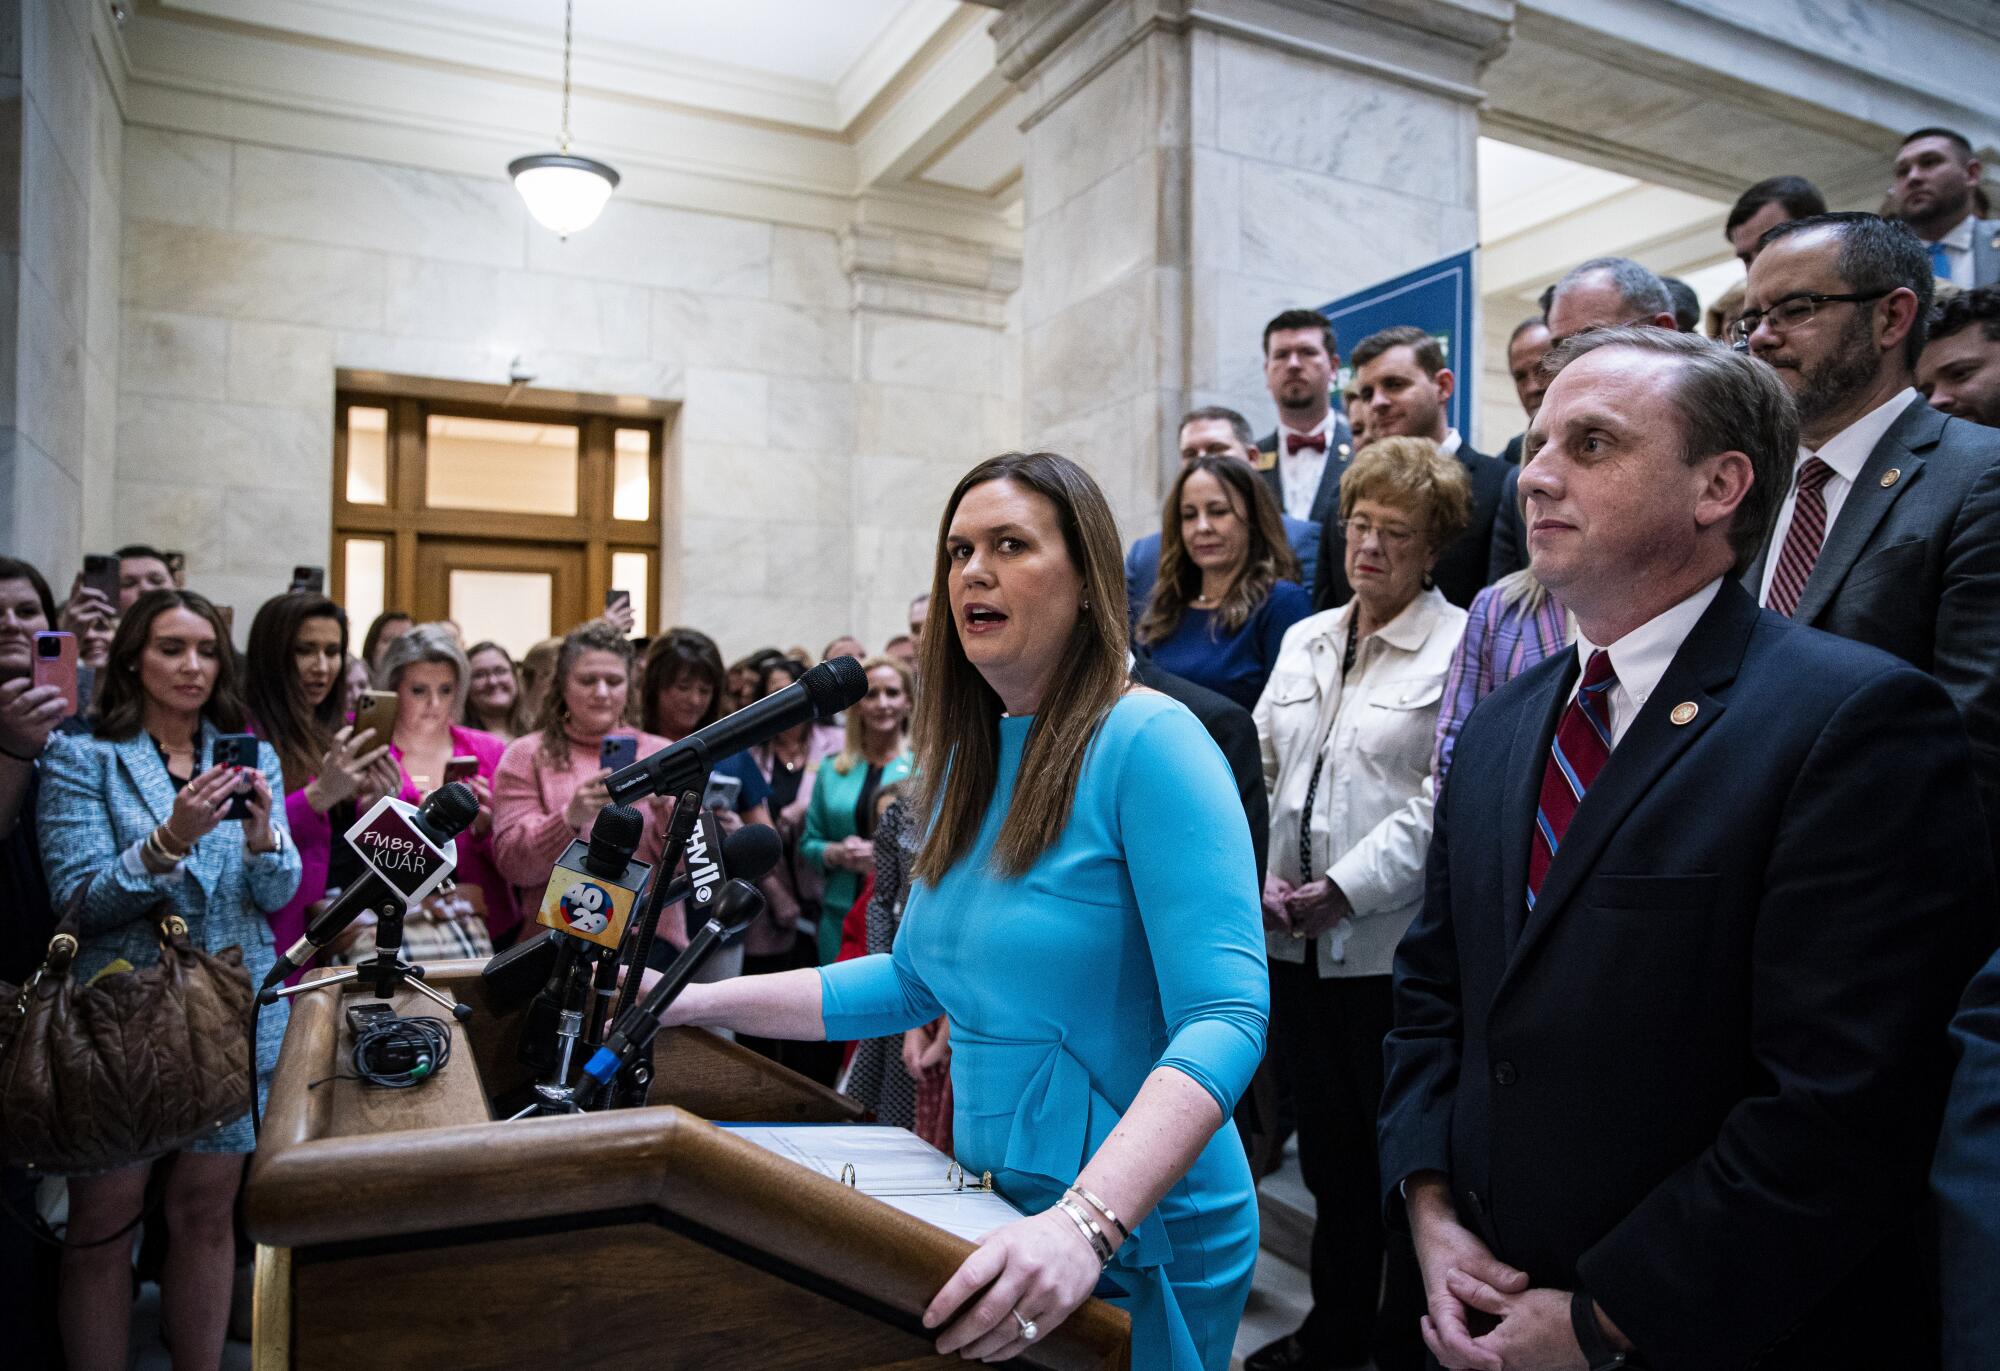 Sarah Huckabee Sanders, governor of Arkansas, speaks at a podium, surrounded by people